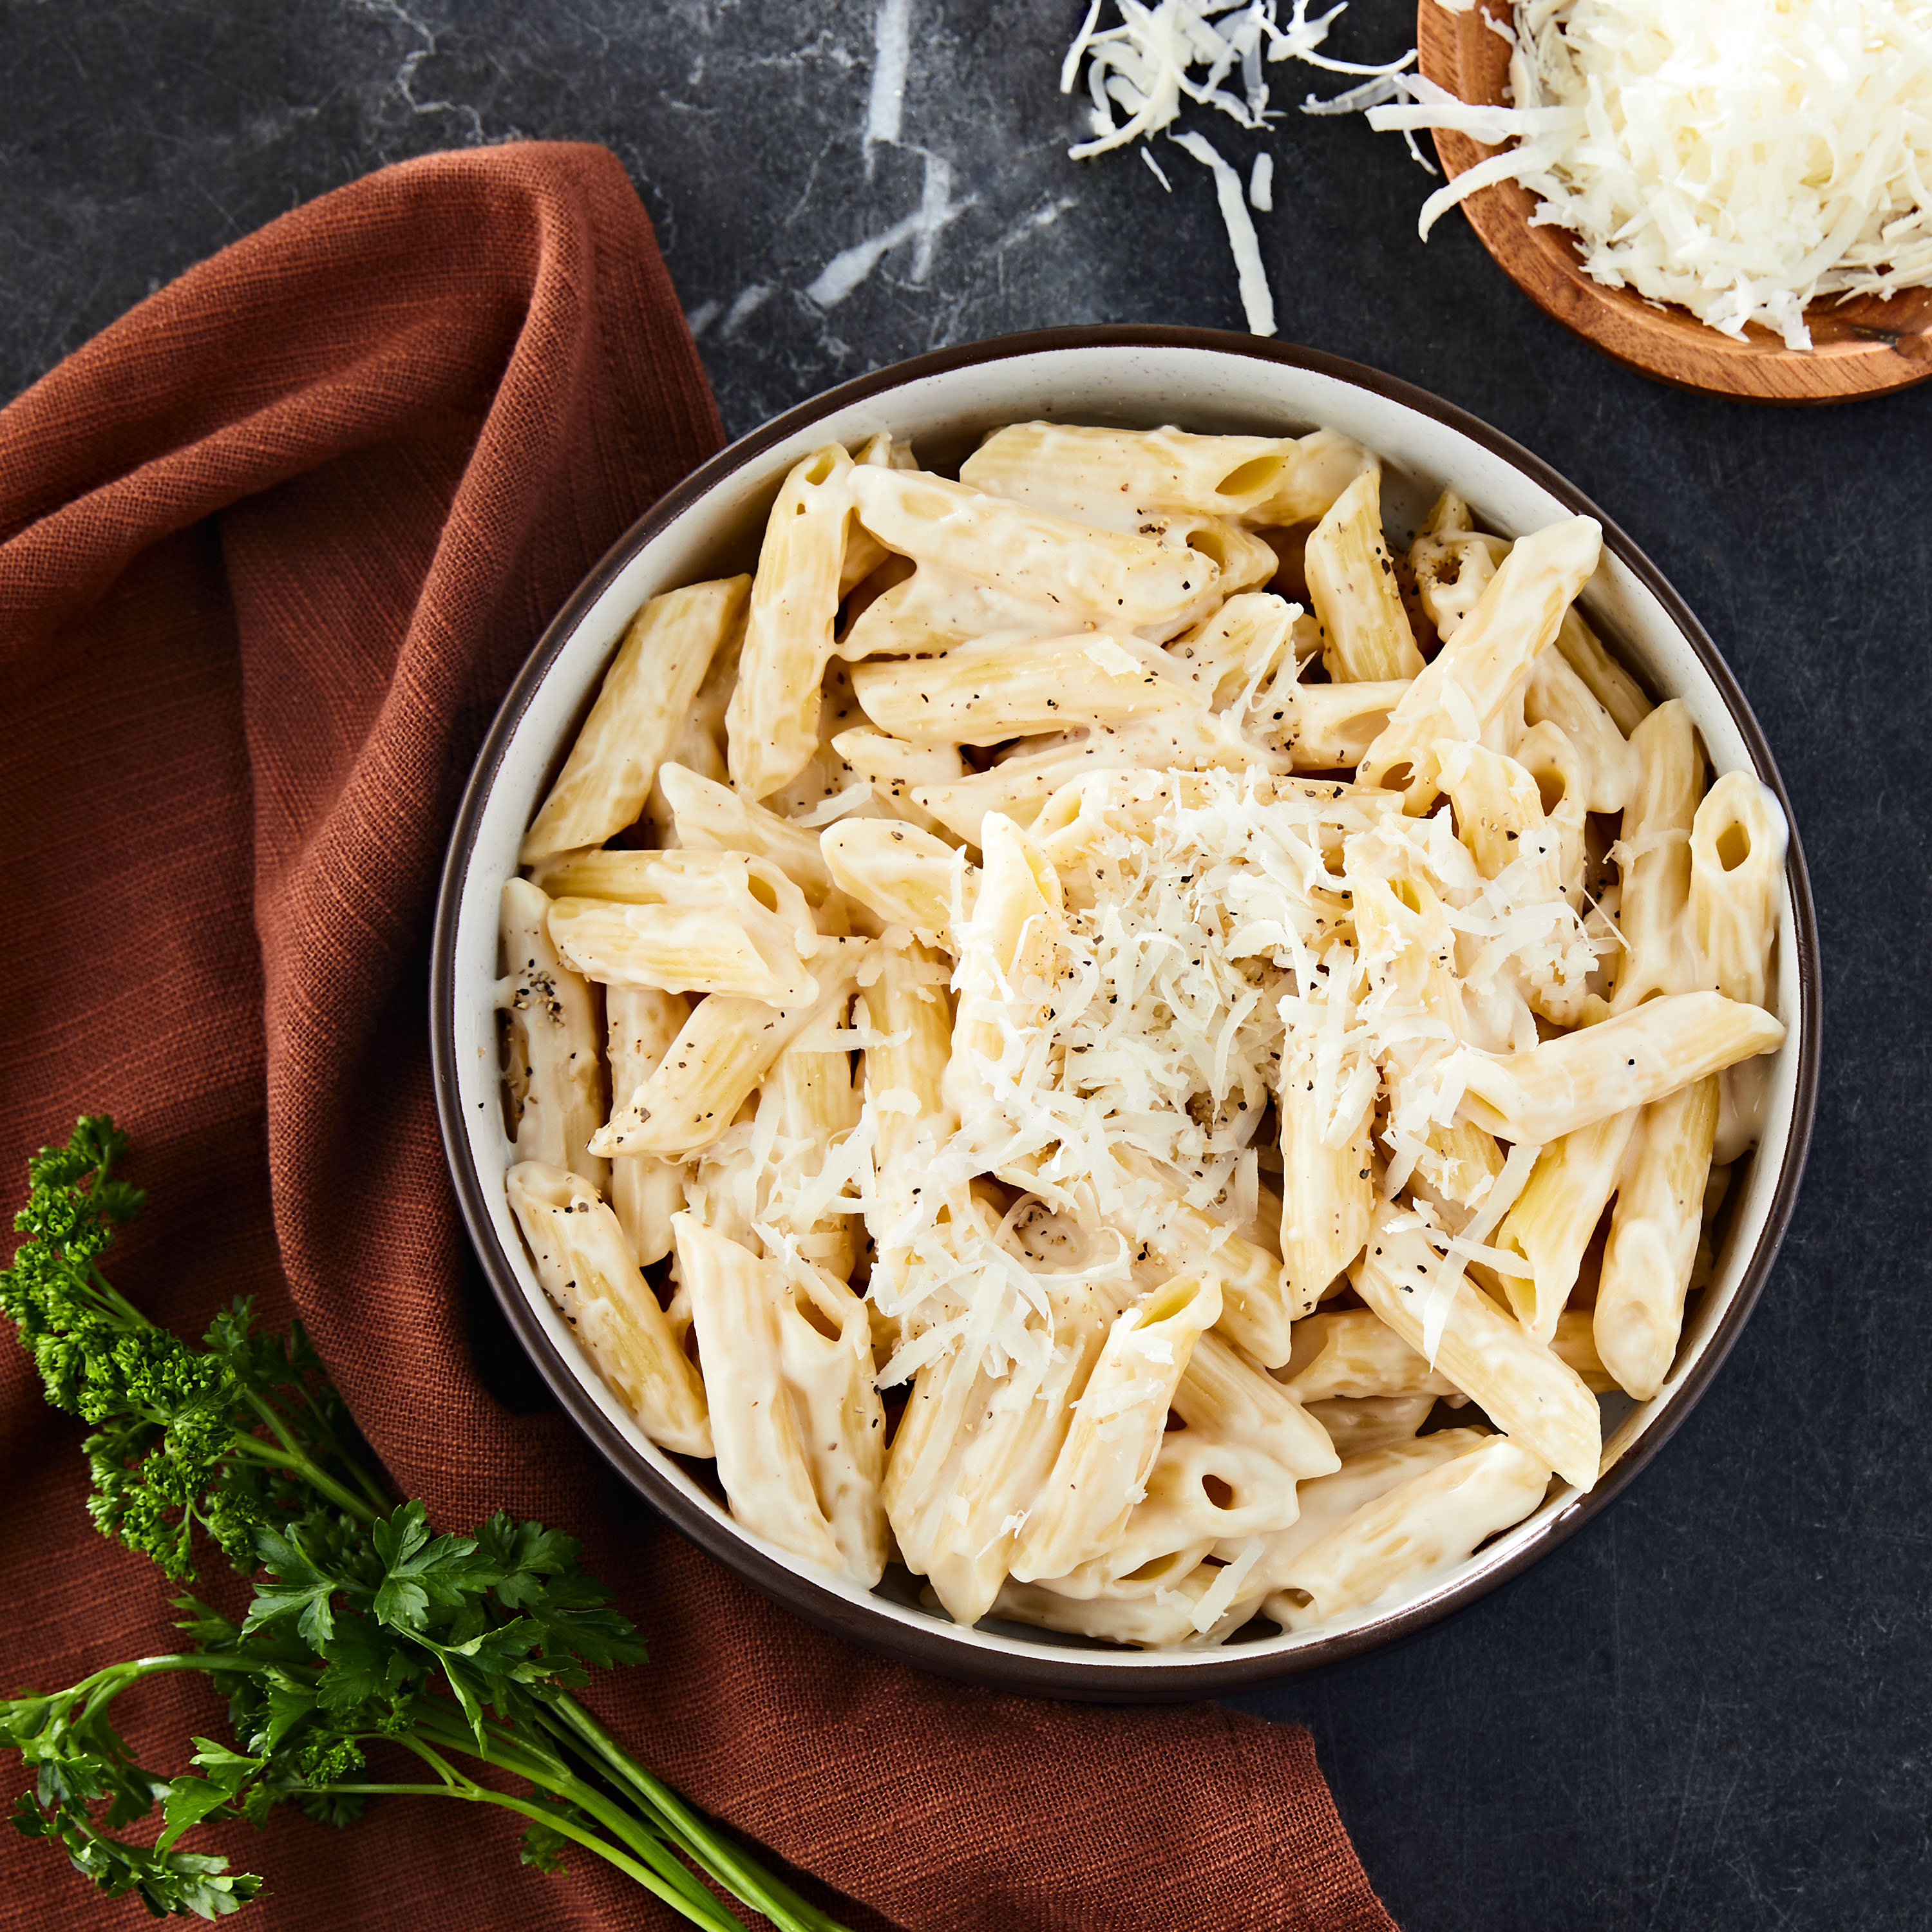 Great Value 4 Cheese Alfredo Pasta Sauce, 16 oz - image 2 of 8